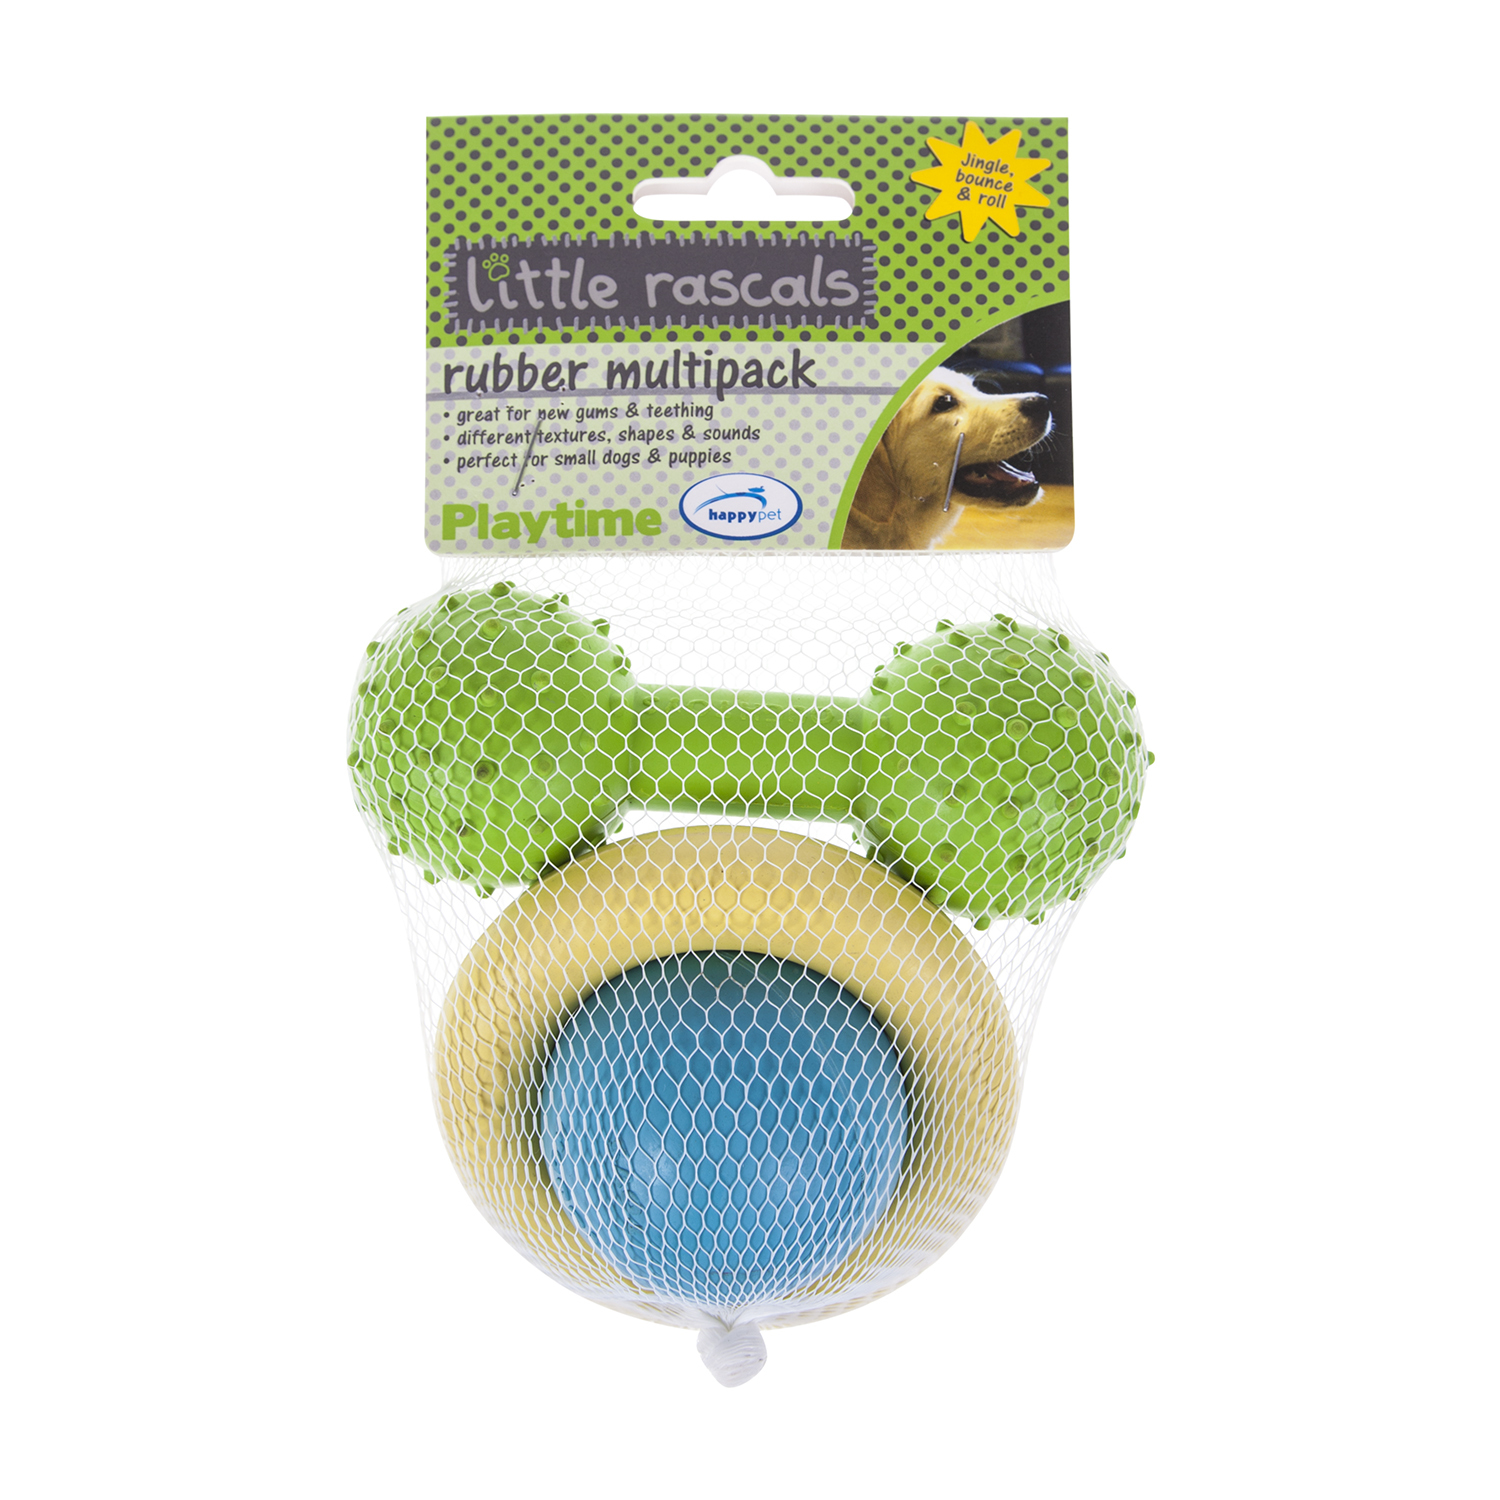 Little Rascals Rubber Multi Pack Dog Toys Image 1